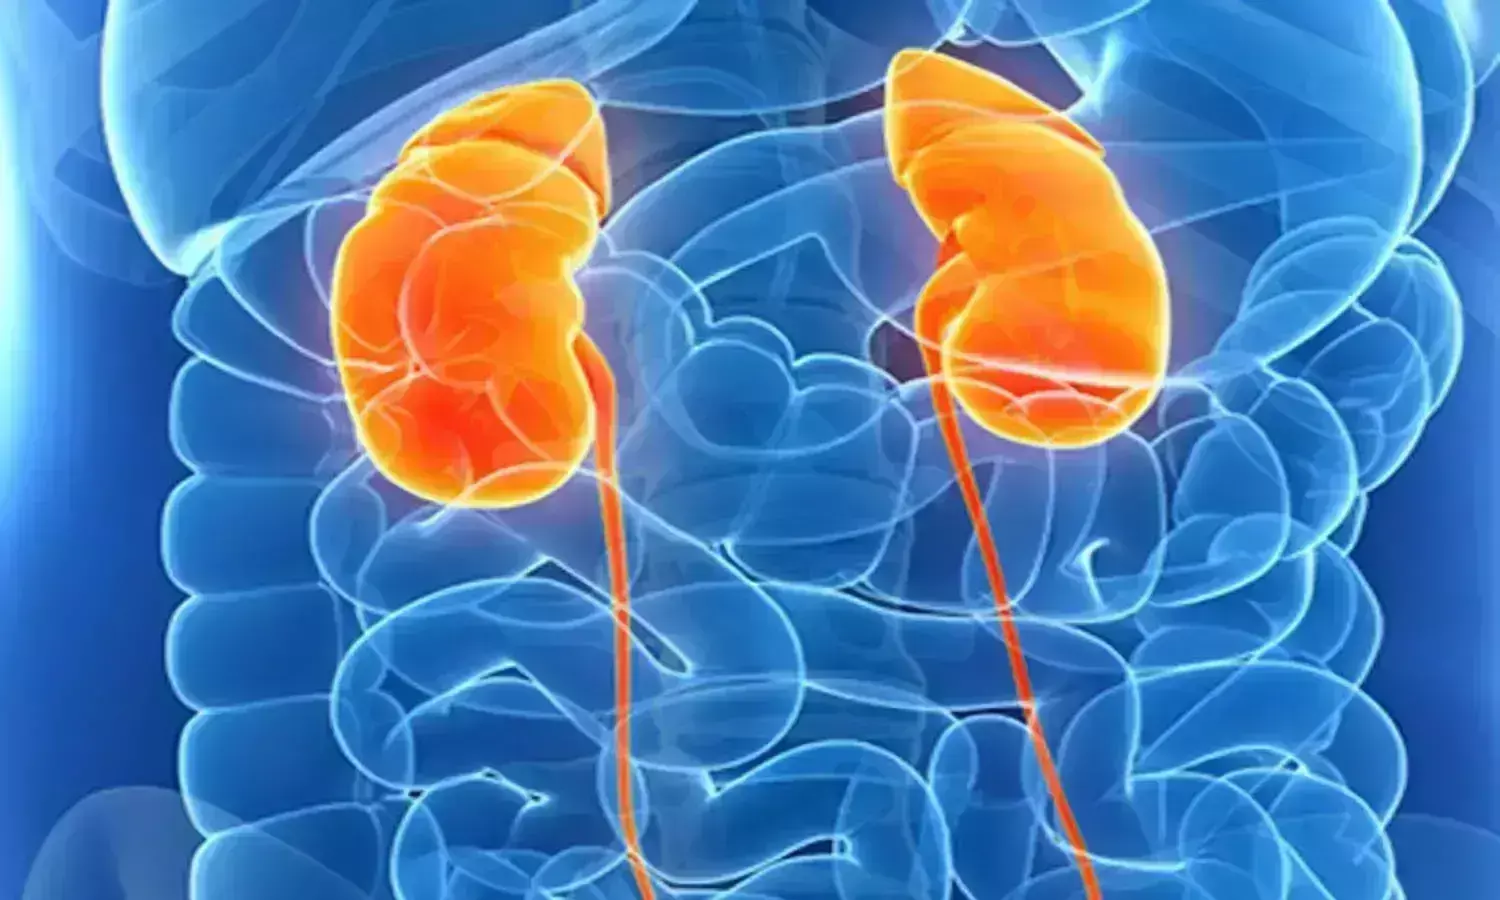 Cytoreductive Nephrectomy beneficial in metastatic renal cell carcinoma: Study